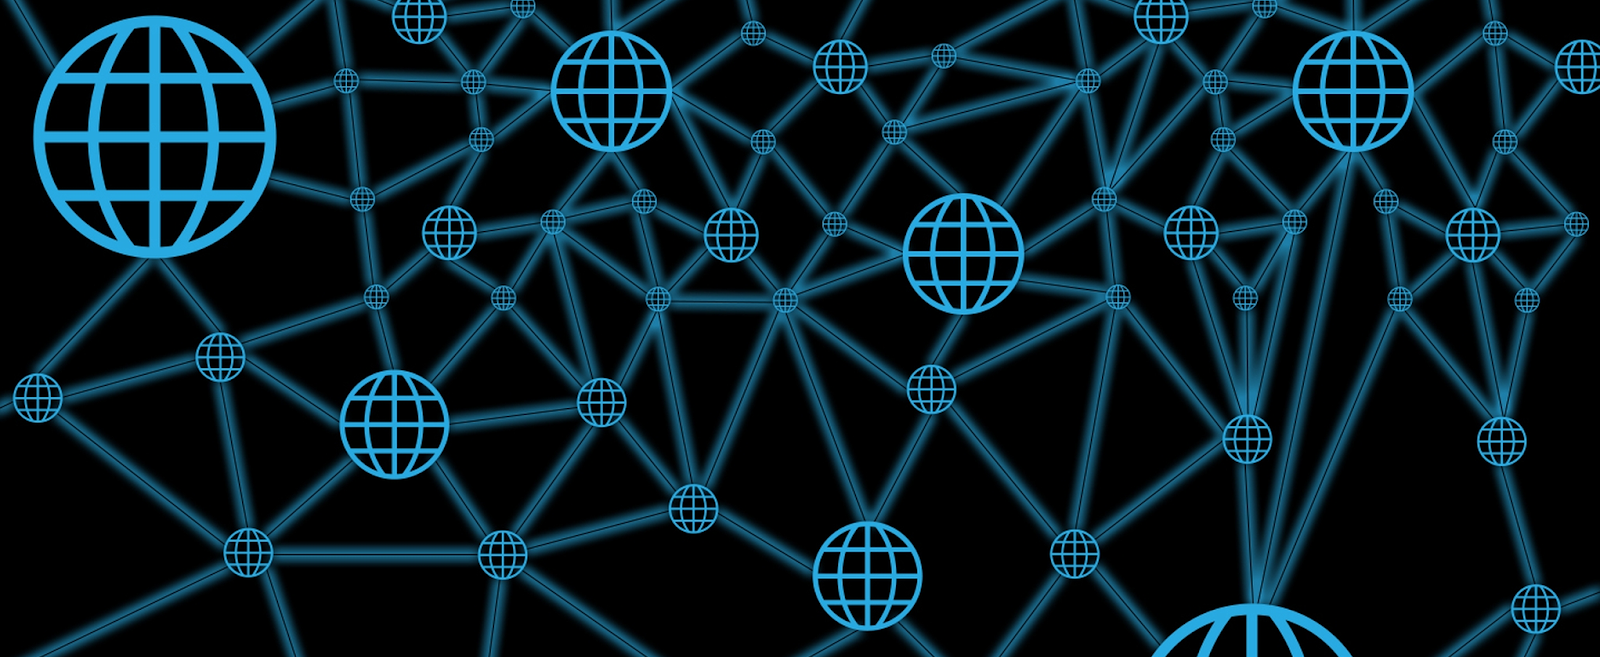 Nodes connected in a decentralized network.